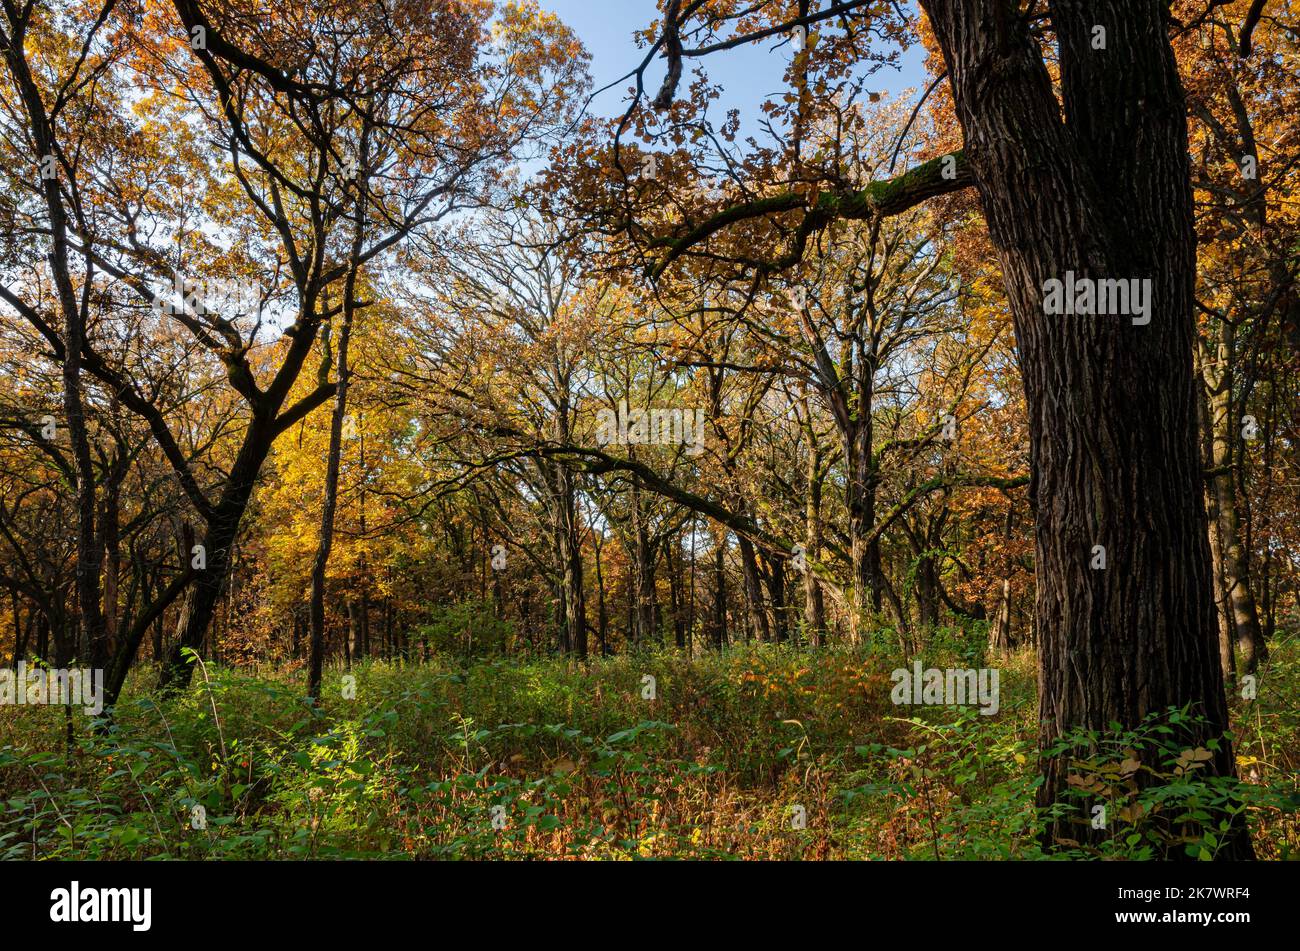 Autumn color takes over an Oak Savanna at Waterfall Glen Forest Preserve in DuPage County, Illinois Stock Photo